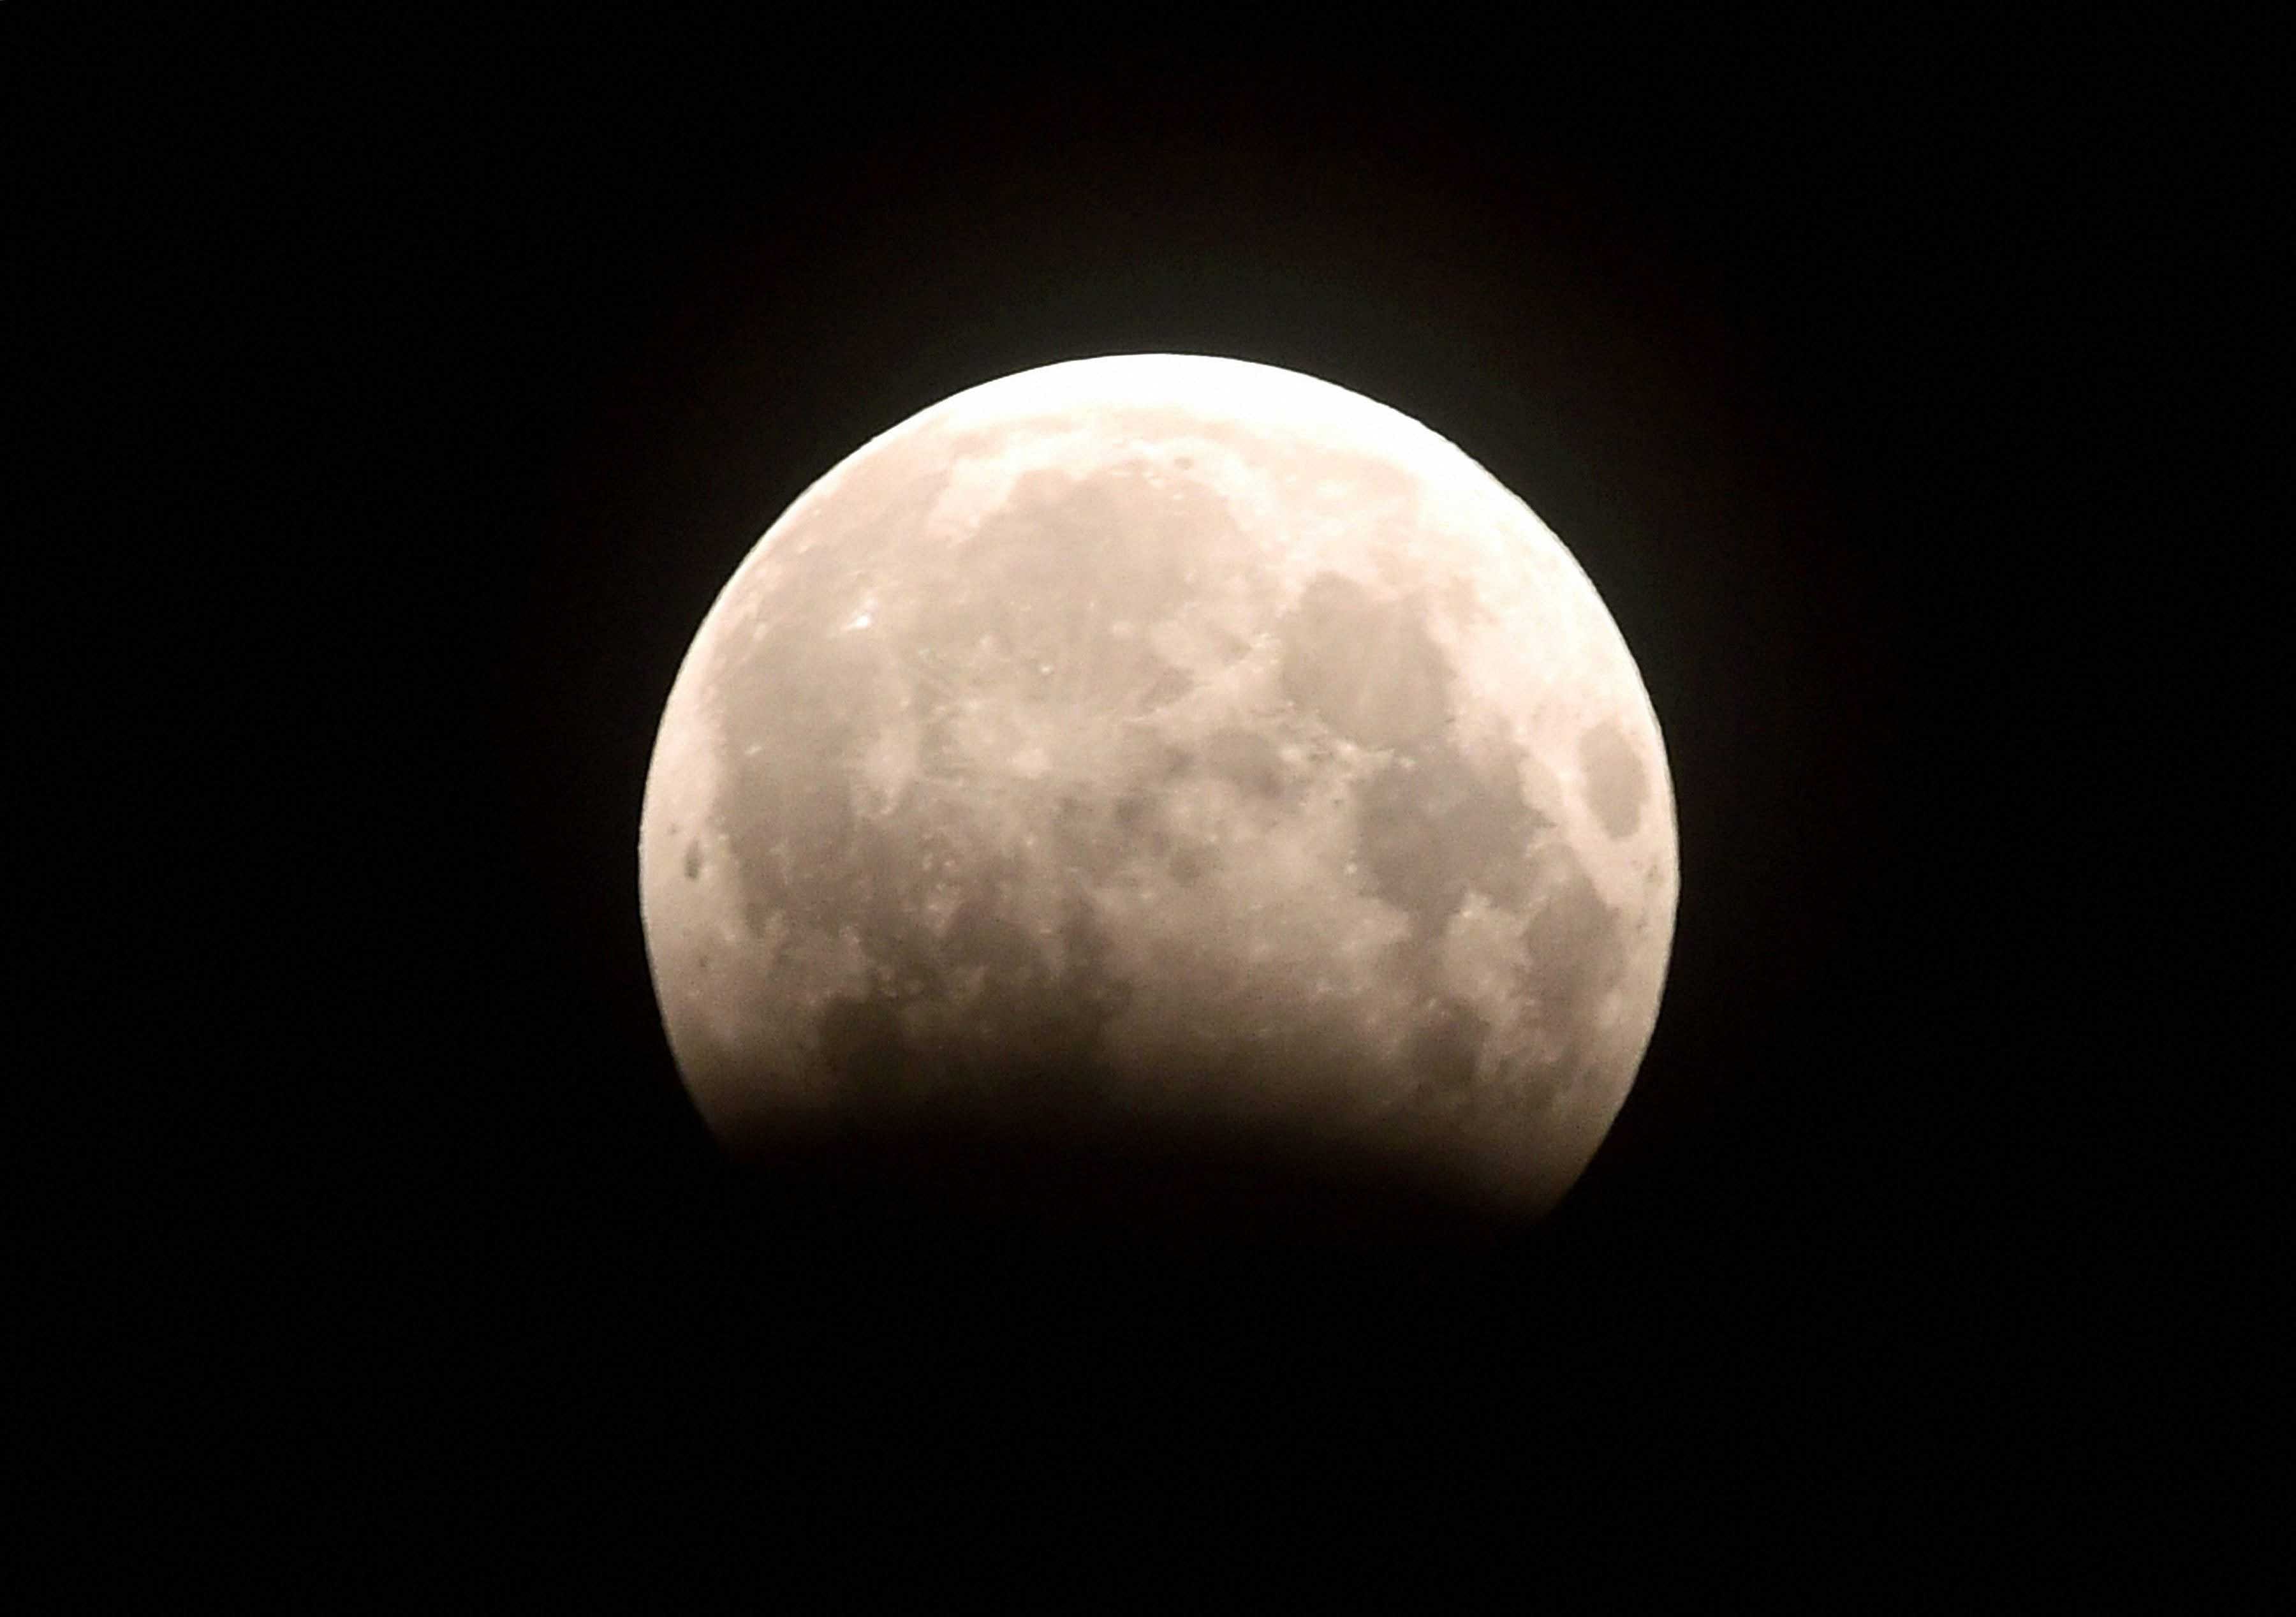 This eclipse is expected to be the longest lunar eclipse of the century but the time difference is not extreme, it is just longer by 10-15 mins when compared to any other eclipse, said Director of Jawaharlal Nehru Planetarium, Pramod G Galgali. (PTI File Photo)